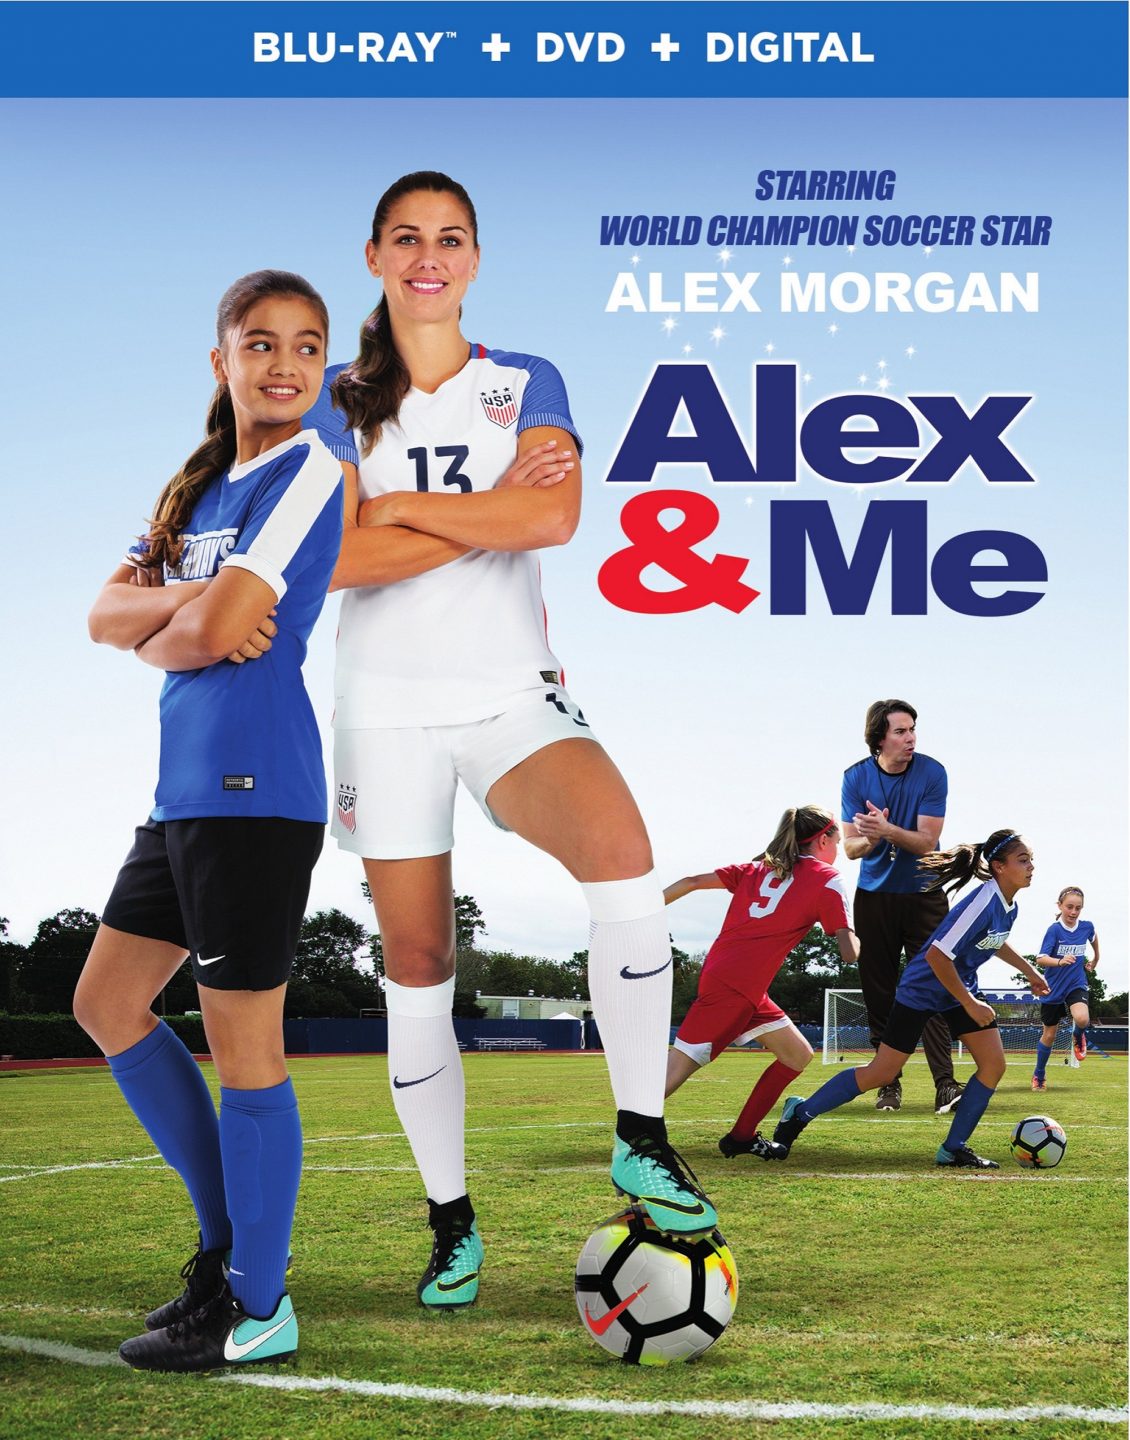 Alex & Me Blu-Ray Combo Pack cover (Warner Bros. Home Entertainment)